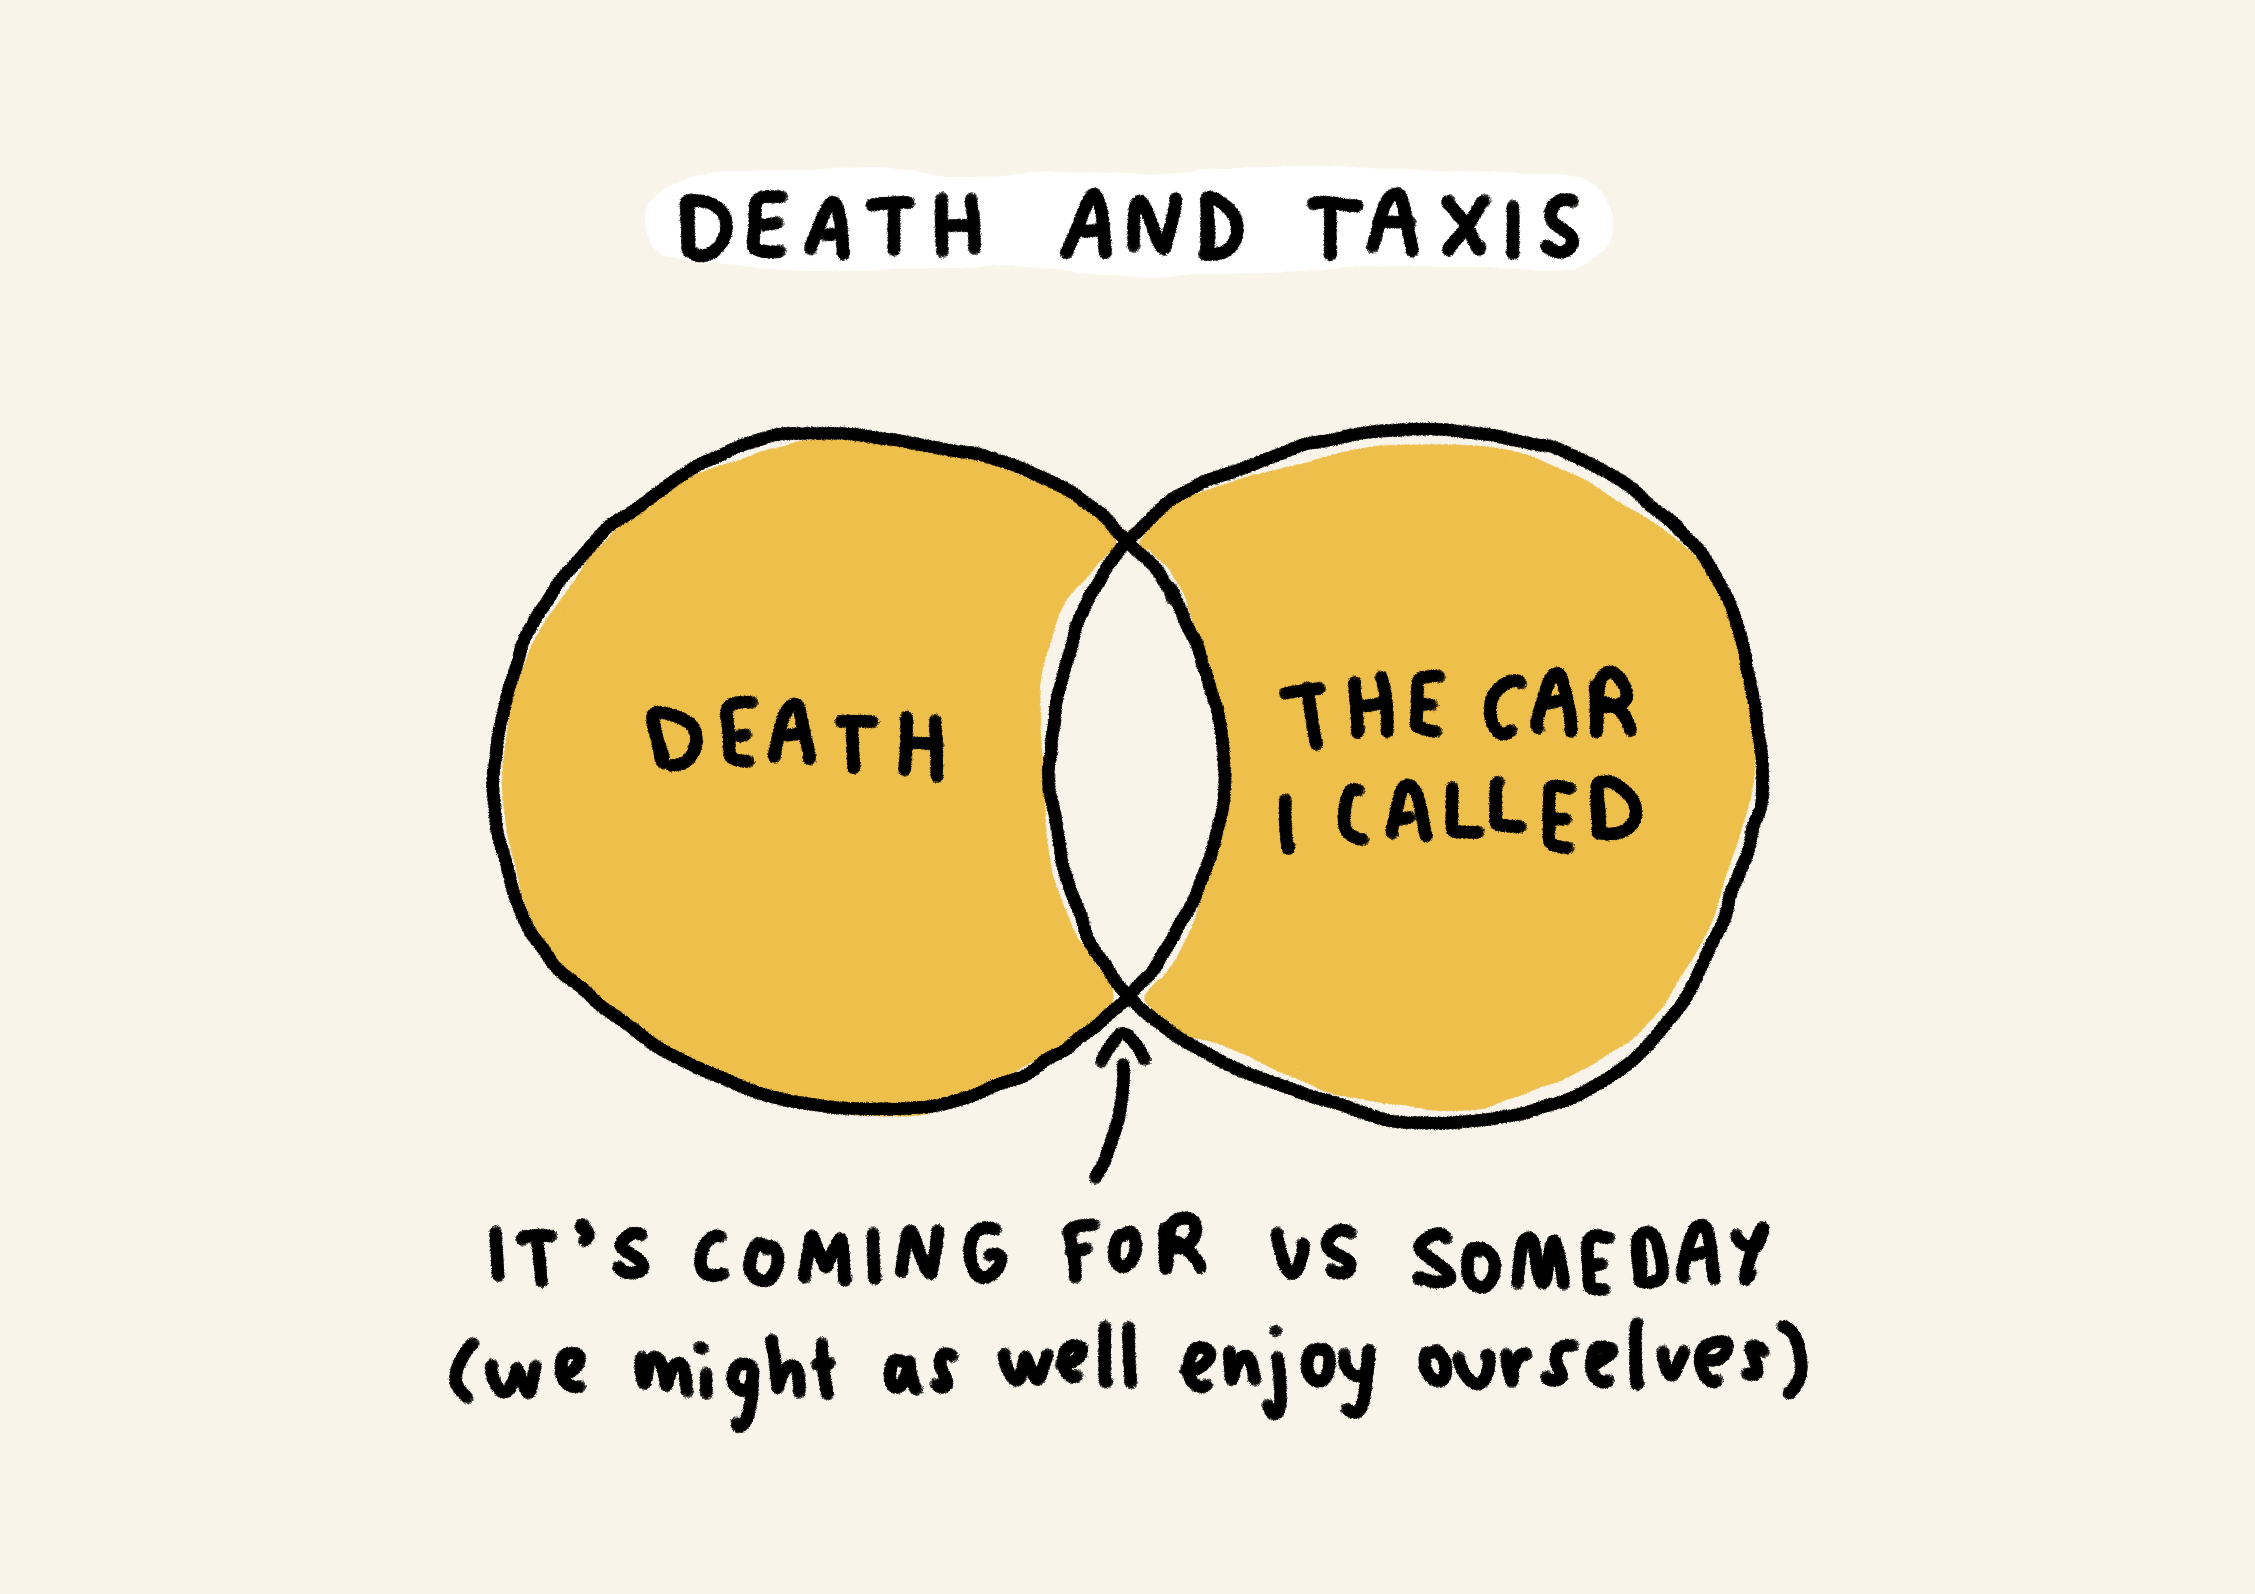 Death and taxis

Death + the car I called = it's coming for us someday (we might as well enjoy ourselves)